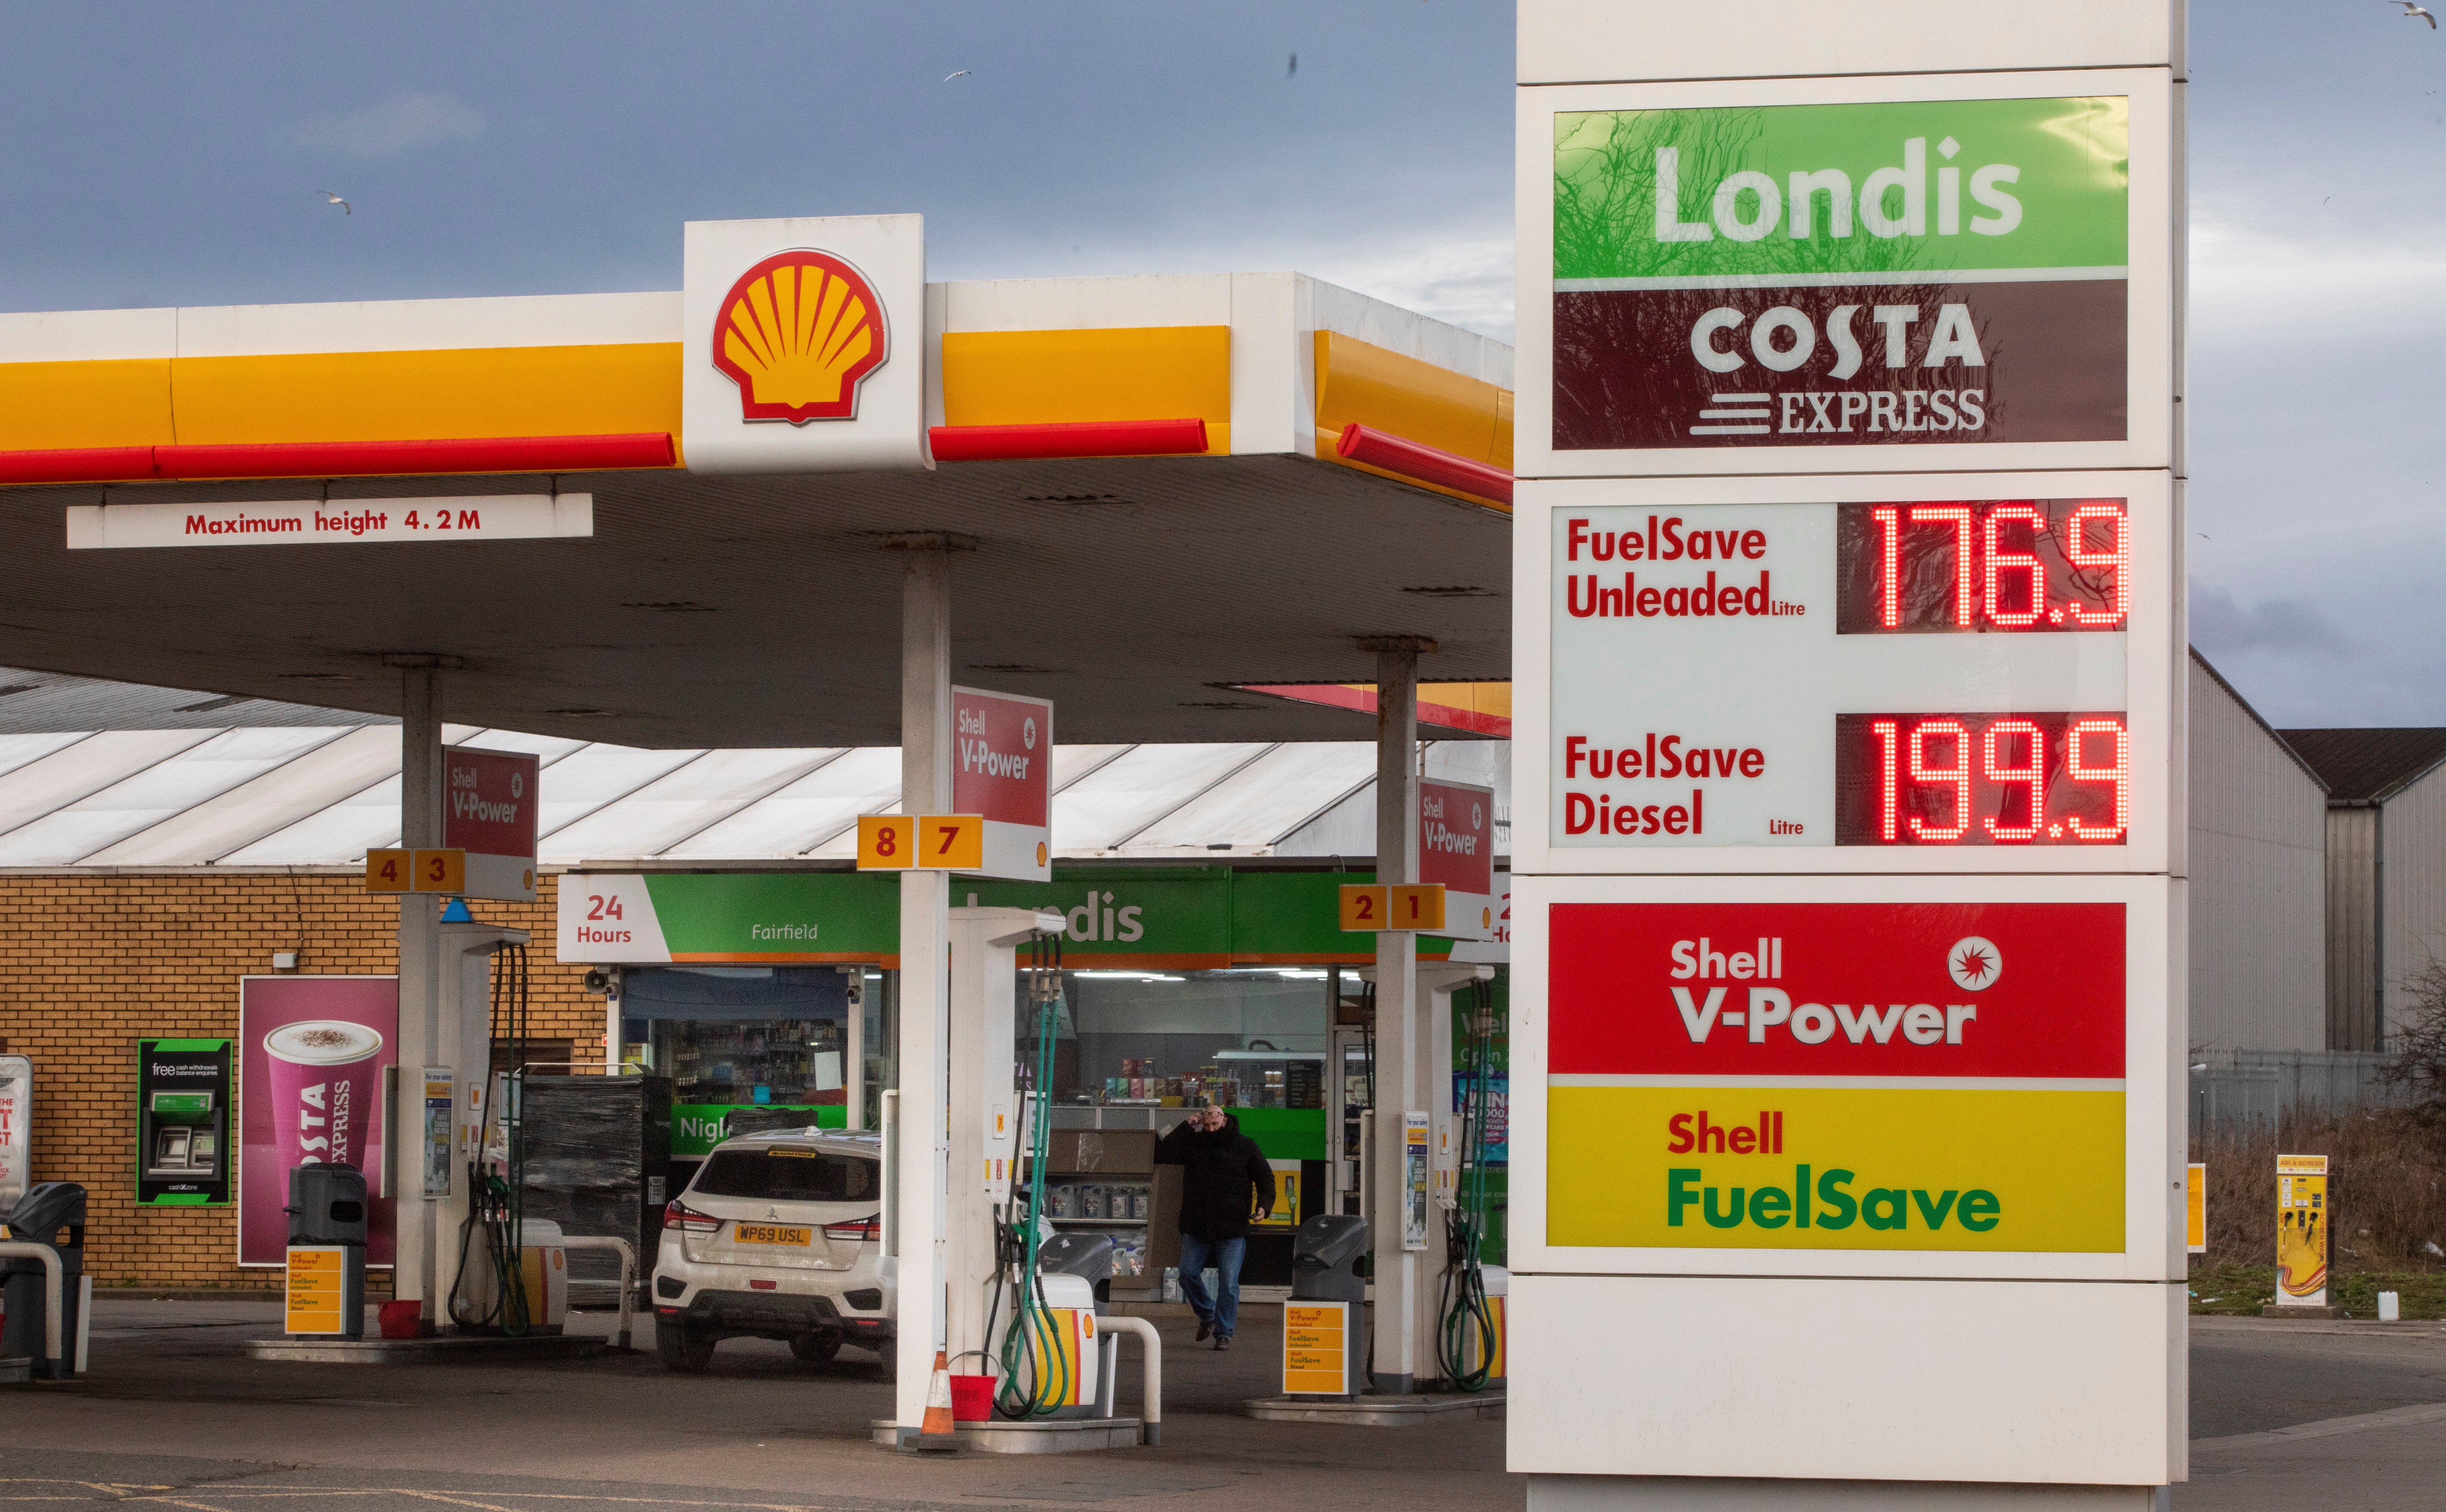 Petrol prices have topped £2 in some parts of the UK